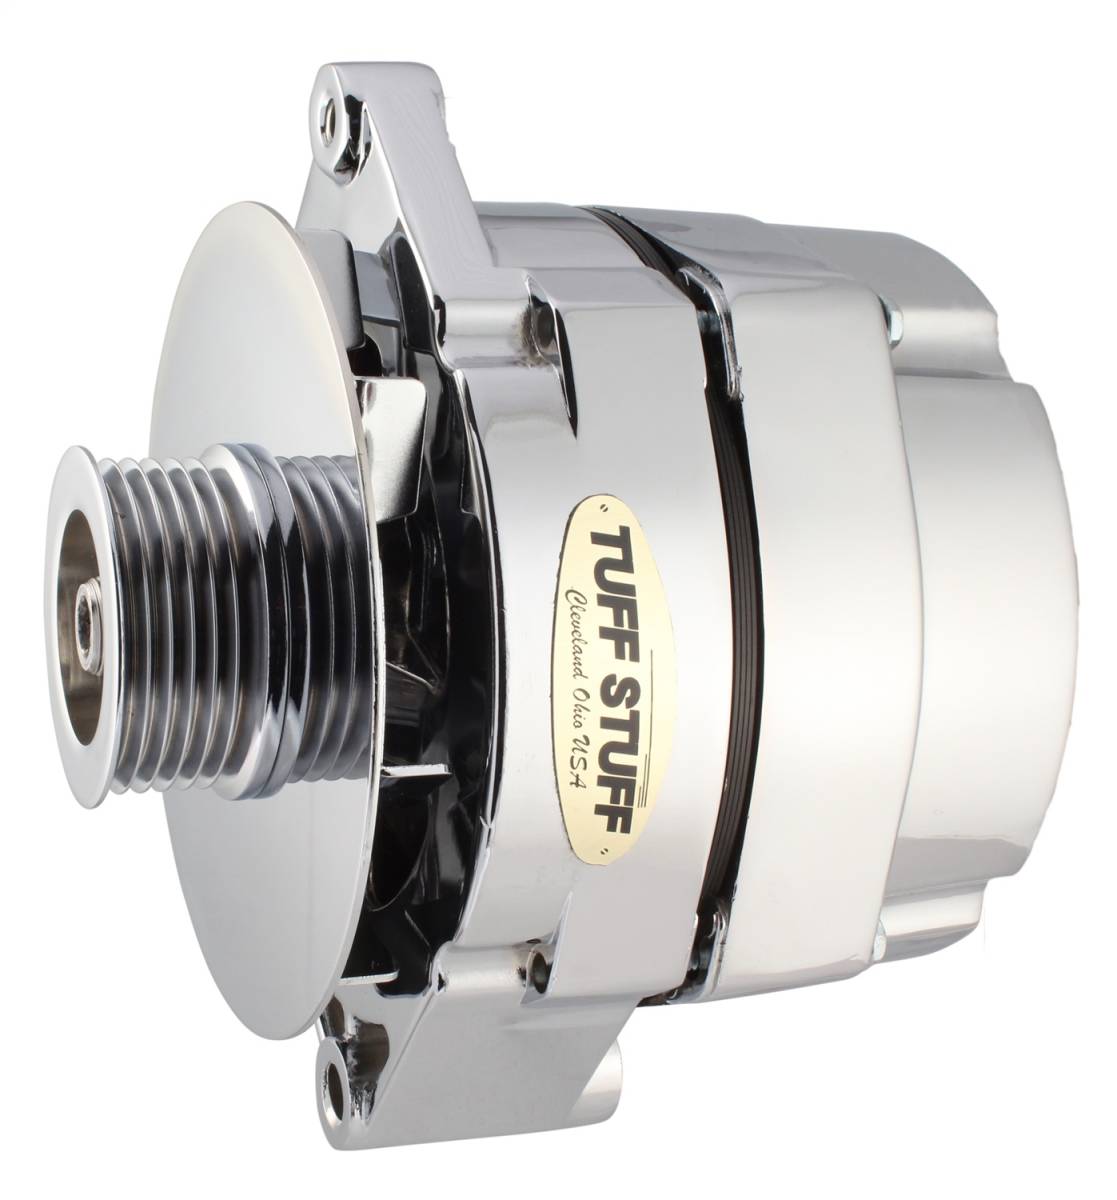 Tuff Stuff Performance - Alternator 100 AMP OEM Or 1 Wire 6 Groove Pulley Polished 12 Clocking 7127NDP6G12